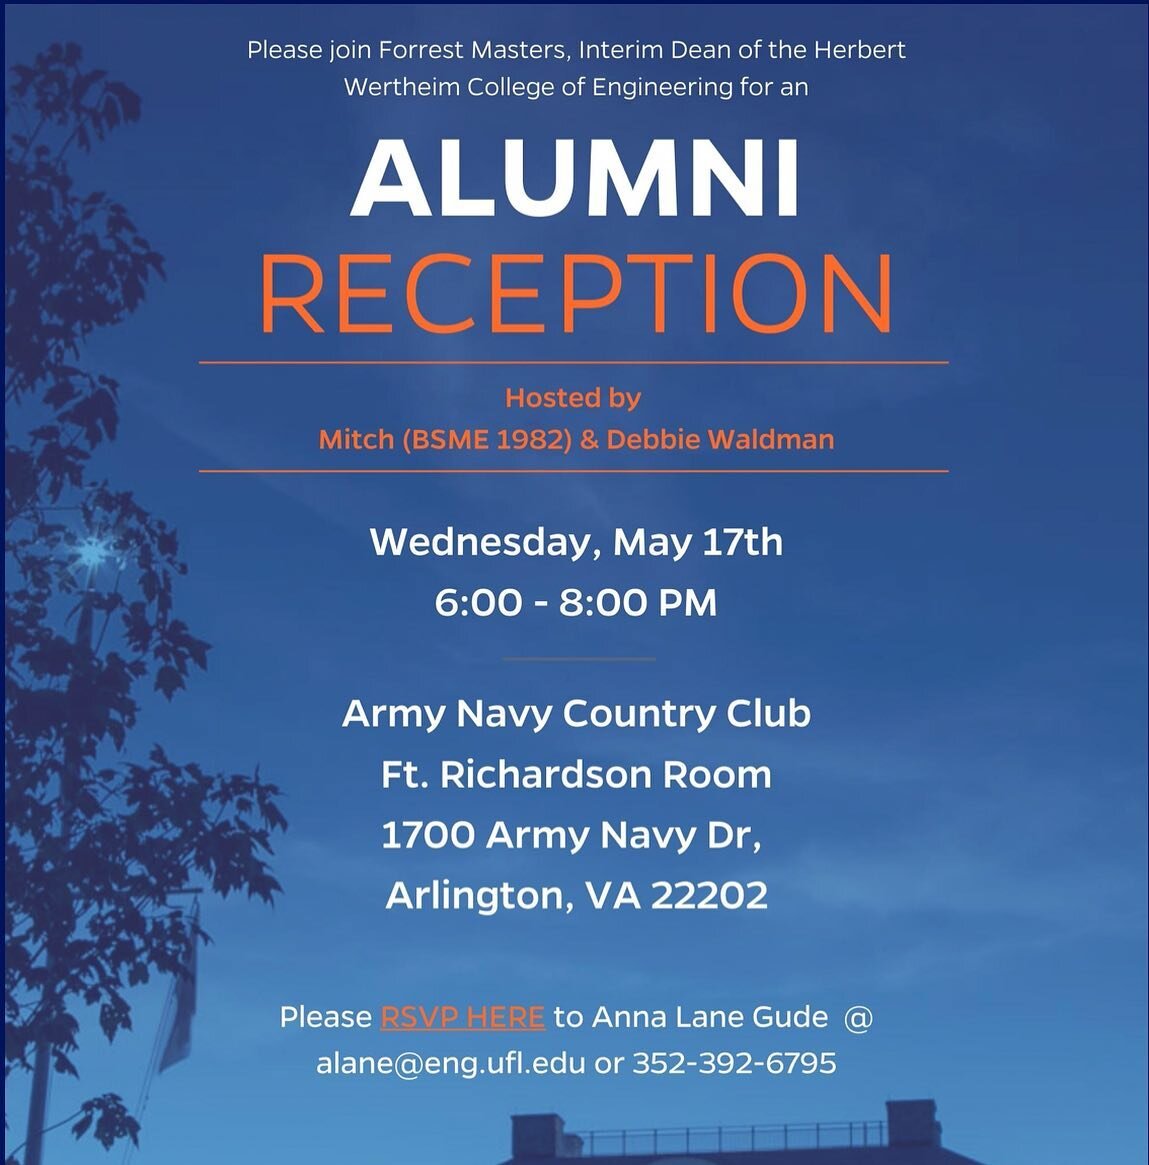 Attention all D.C. #gatorengineering alumni!

Please join for an alumni reception on Wednesday May 17th at the Army Navy Country Club in Arlington. 

To RSVP, email Anna Lane Gude at alane@eng.ufl.edu or call 352-392-6795.

Go Gators! 🐊